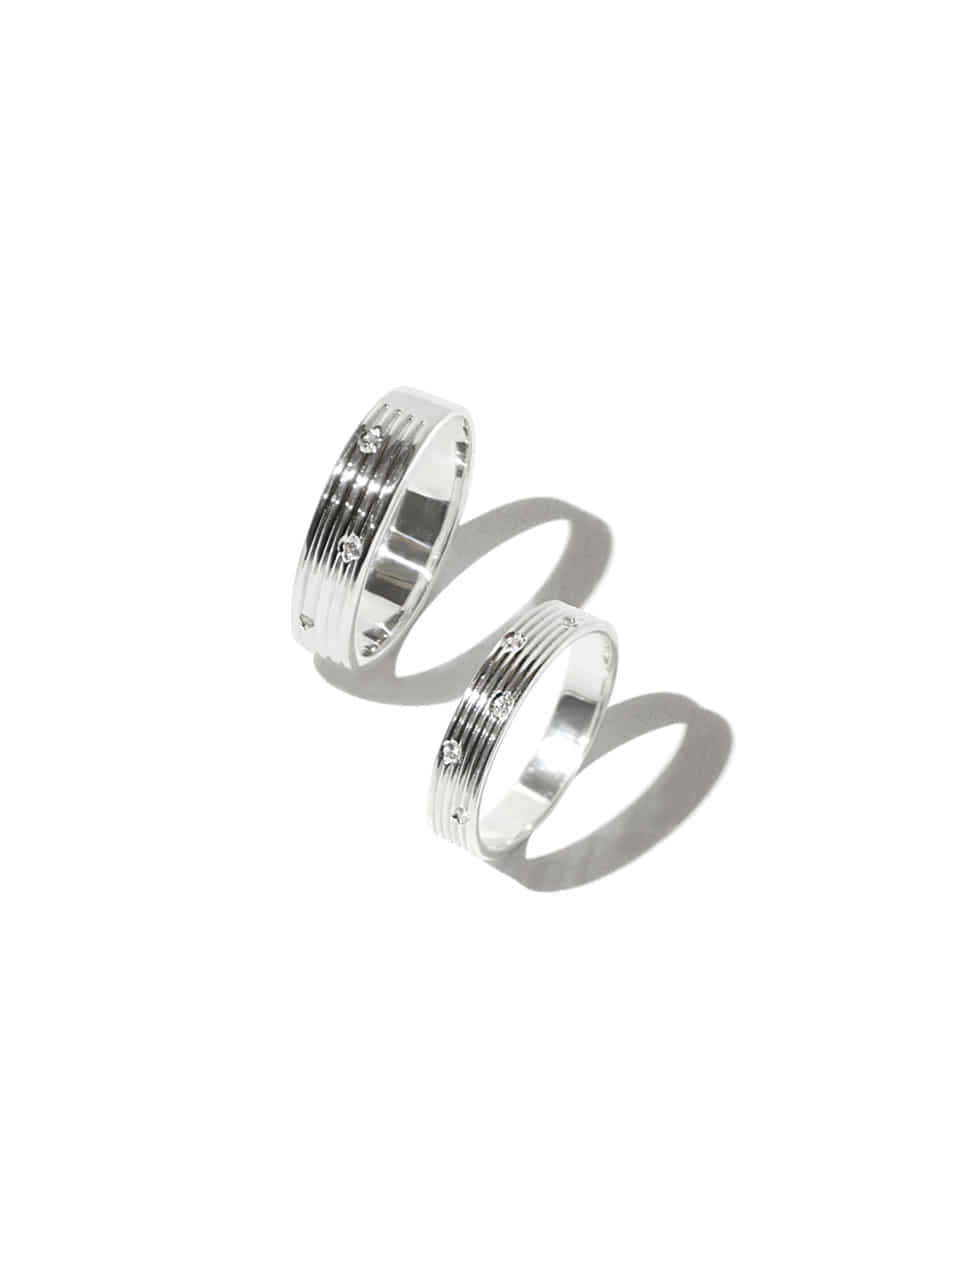 Falling snow couple ring  (Sterling silver 925)